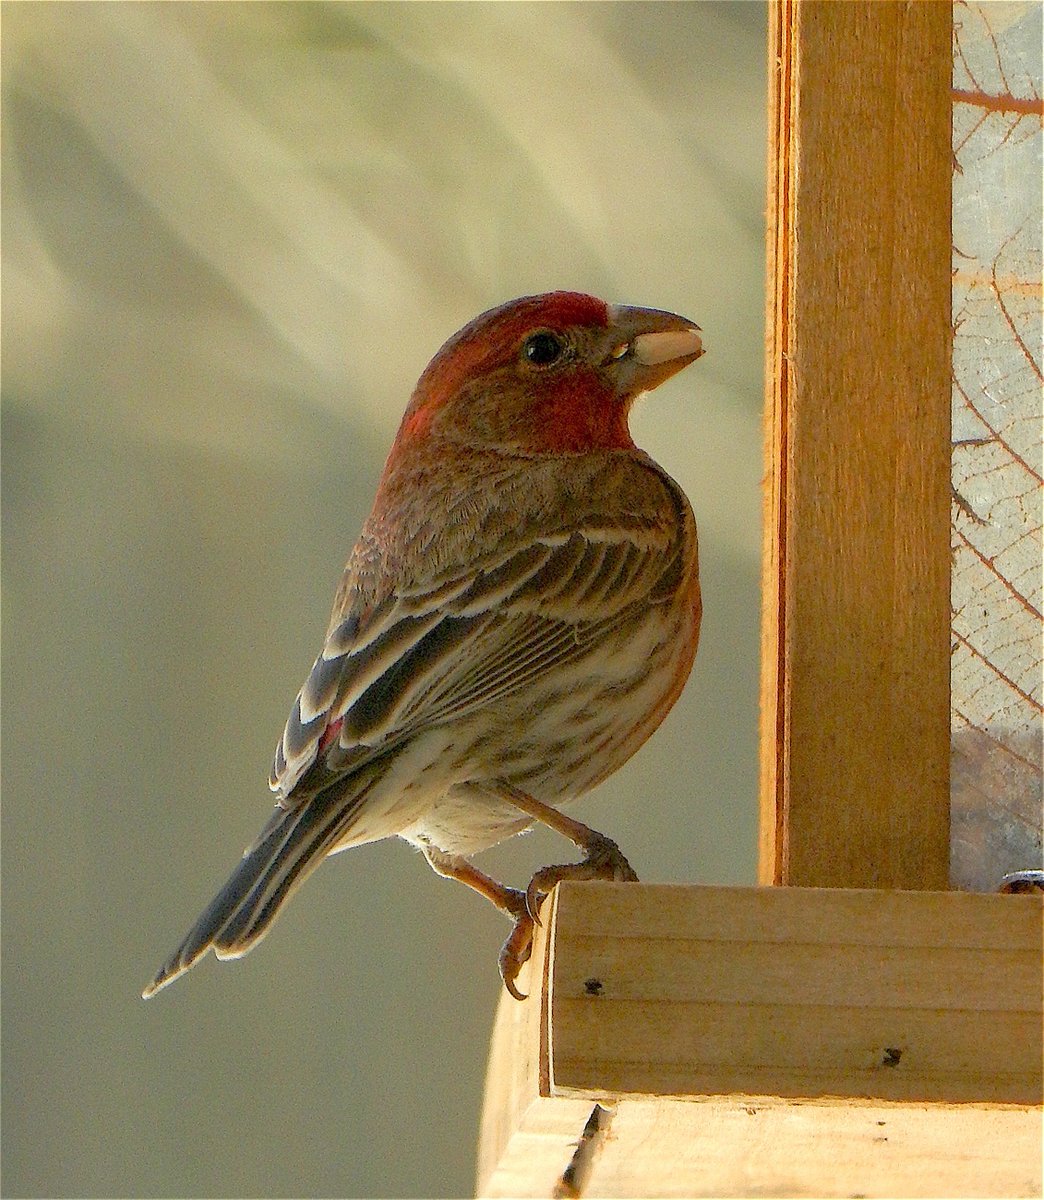 Red House Finch #finch #redhousefinch #birdphotography #winter #birds